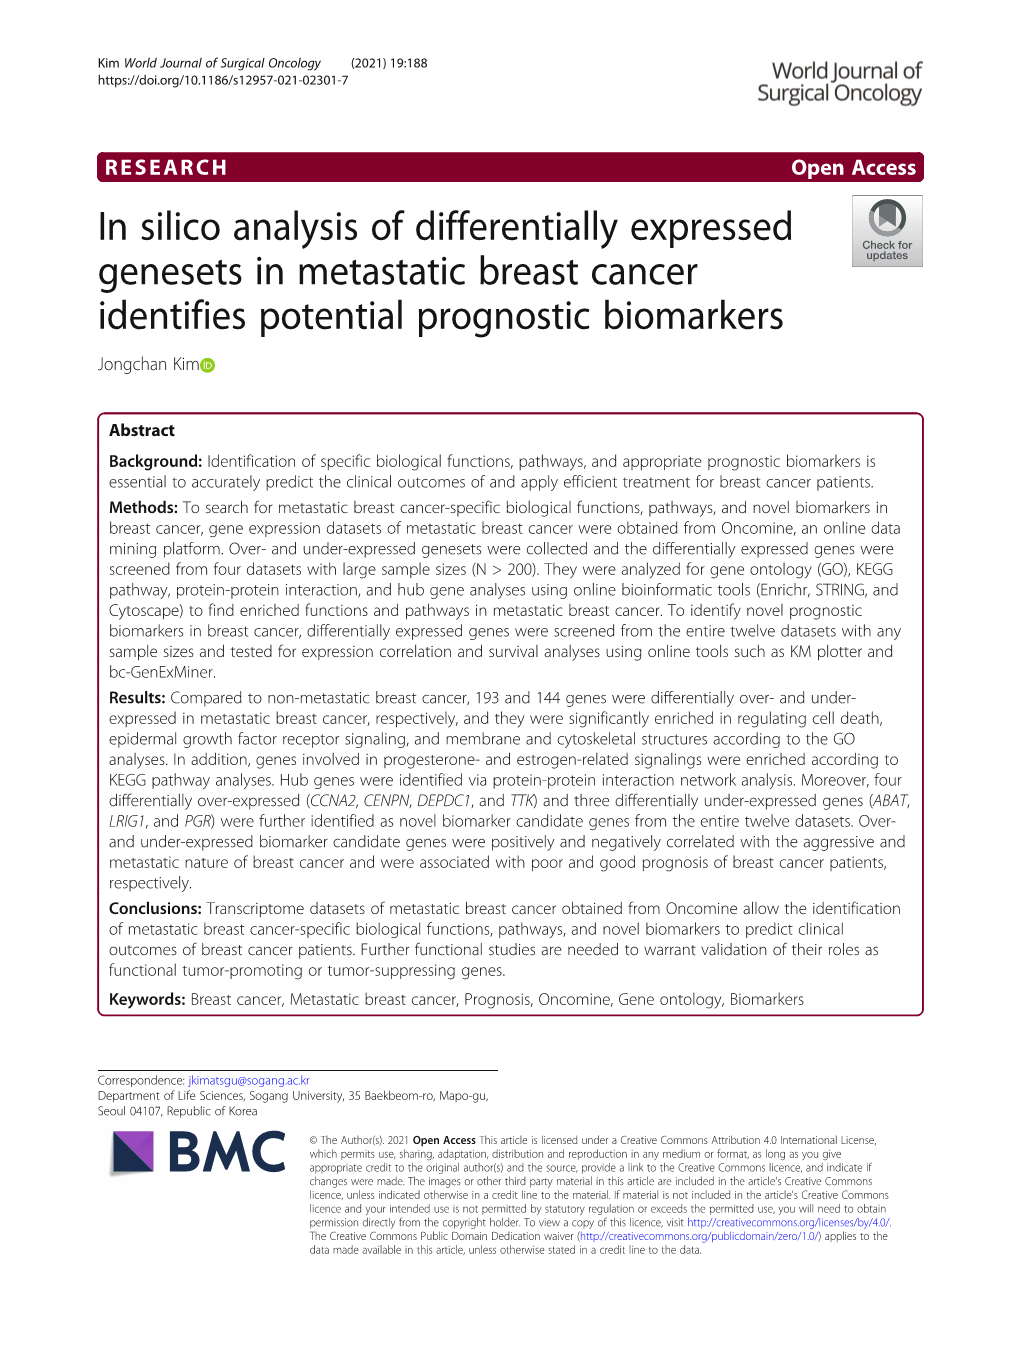 In Silico Analysis of Differentially Expressed Genesets in Metastatic Breast Cancer Identifies Potential Prognostic Biomarkers Jongchan Kim